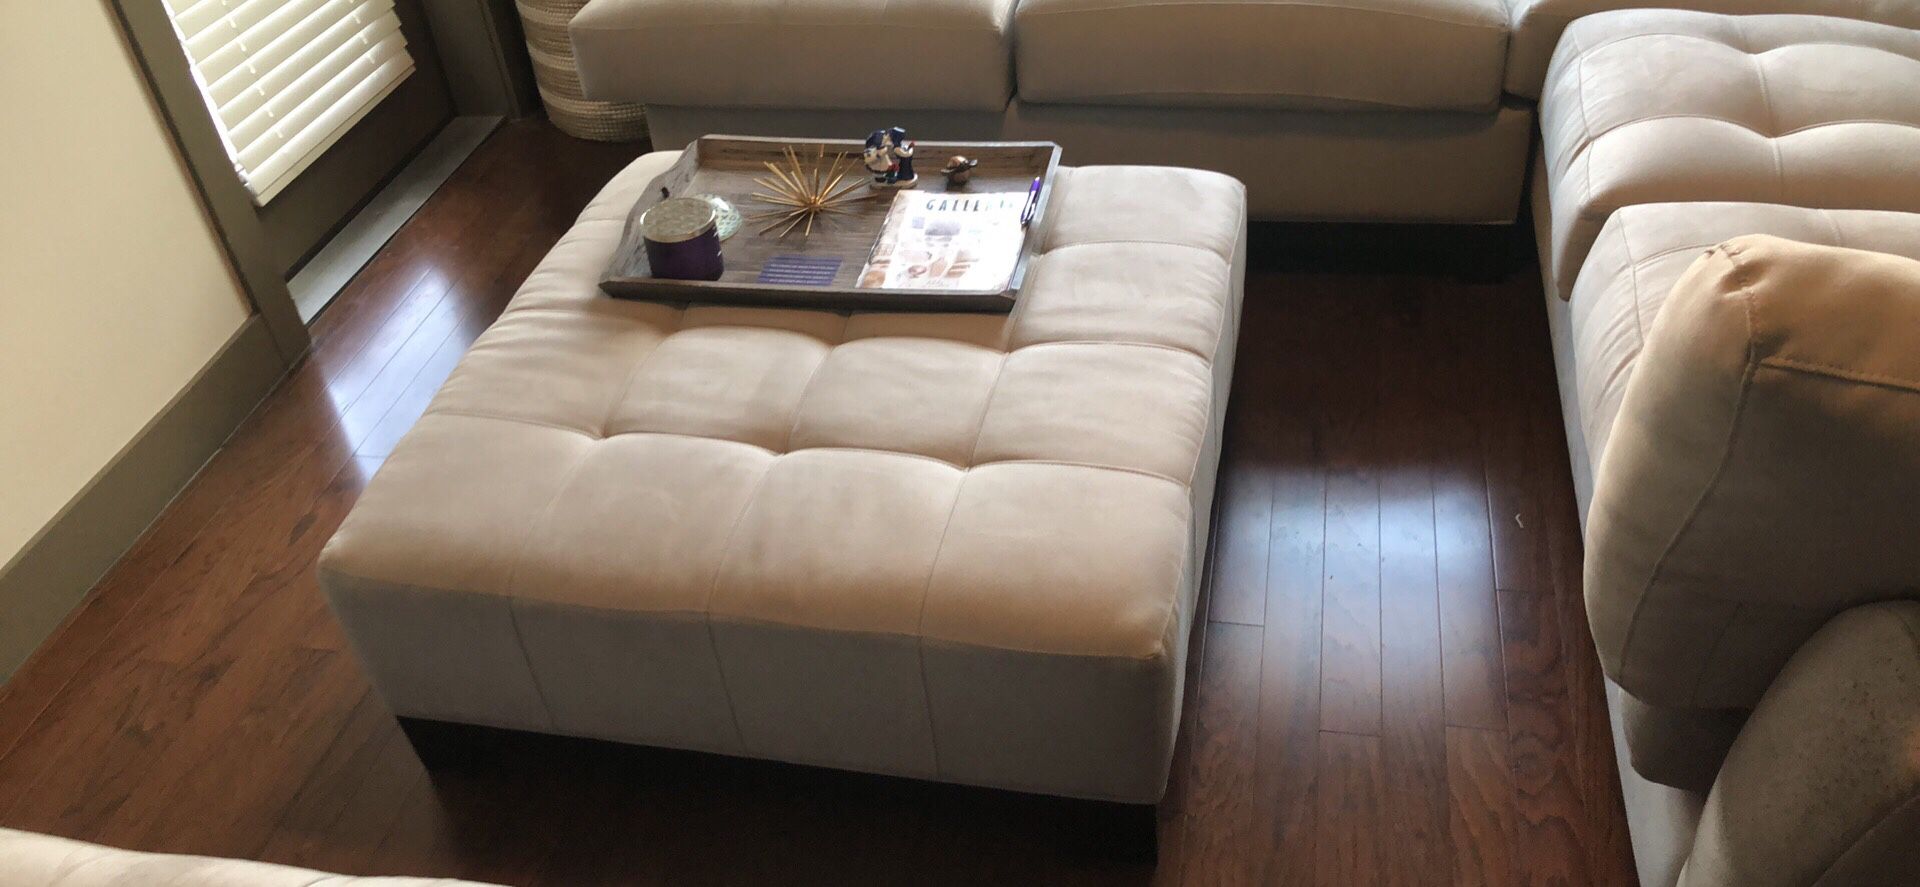 Cindy Crawford Large Sectional Couch